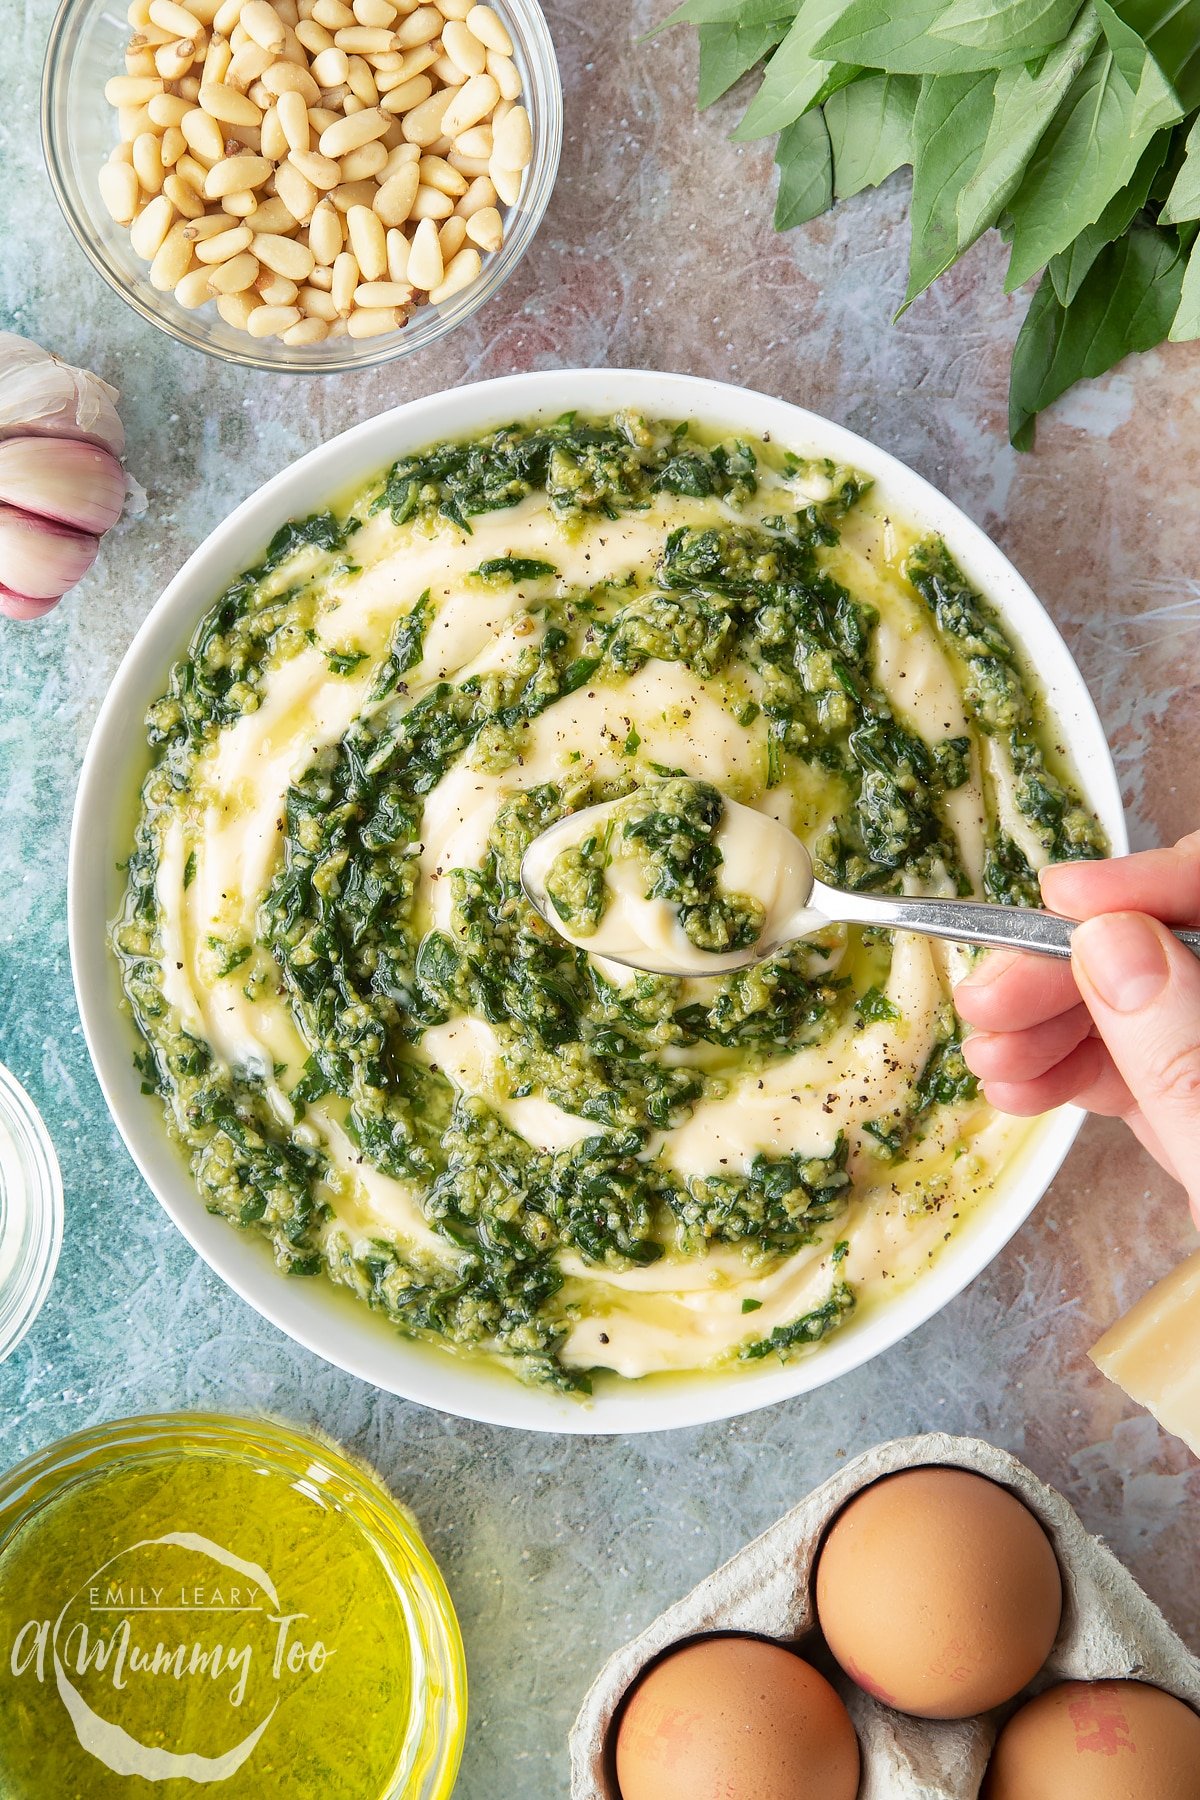 Pesto mayo in a white bowl. The pesto and mayonnaise are swirled together. A hand holds a spoonful above the bowl.